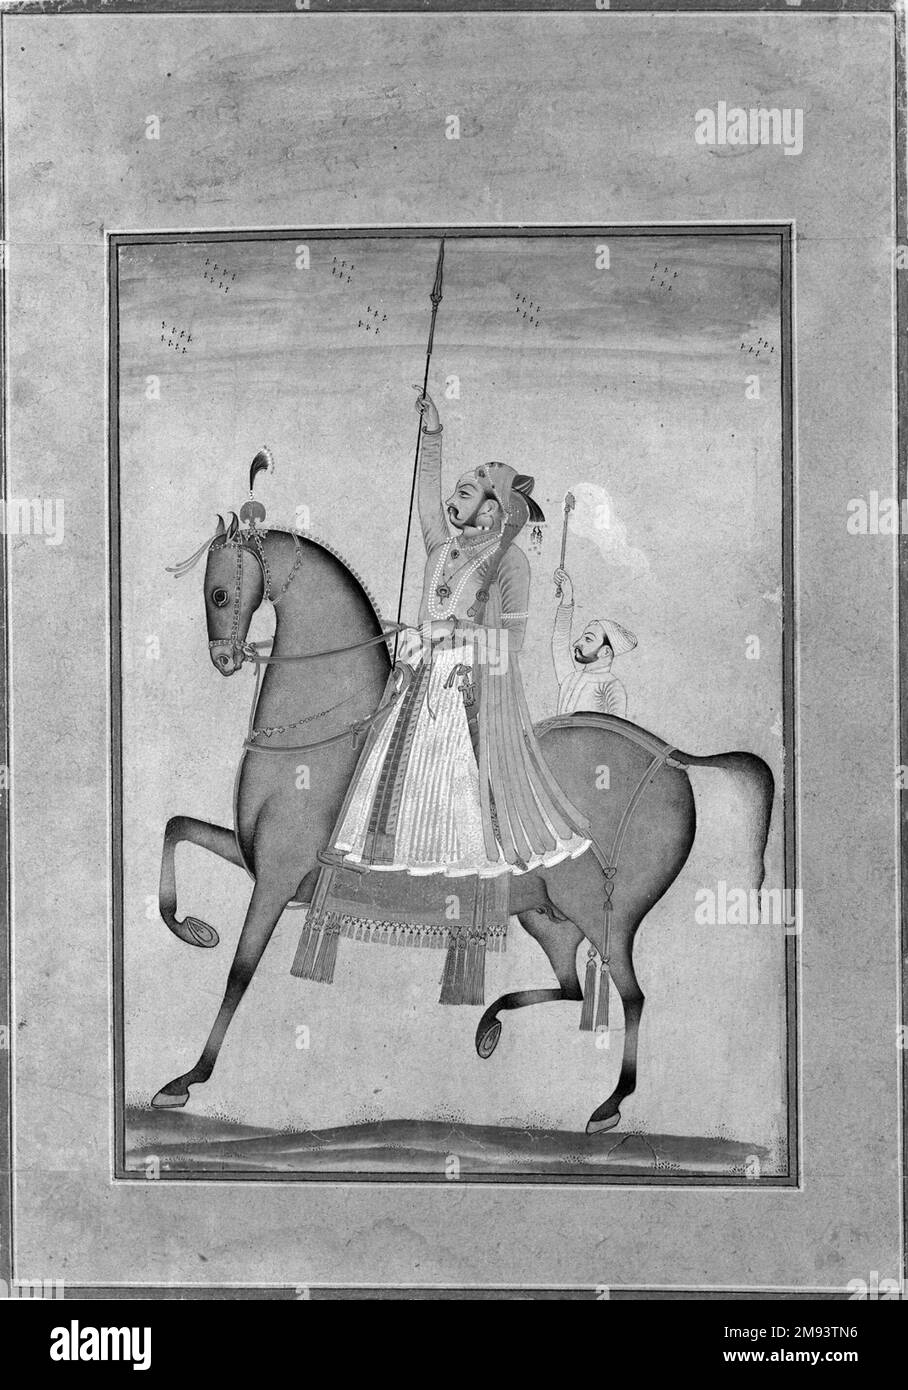 Equestrian Portrait of Maharaja Sujan Singh of Bikaner Kasam, Son of Muhammad. Equestrian Portrait of Maharaja Sujan Singh of Bikaner, ca. 1747. Opaque watercolor, silver, and gold on paper, sheet: 11 1/2 x 8 1/8 in. (29.2 x 20.6 cm).   Asian Art ca. 1747 Stock Photo